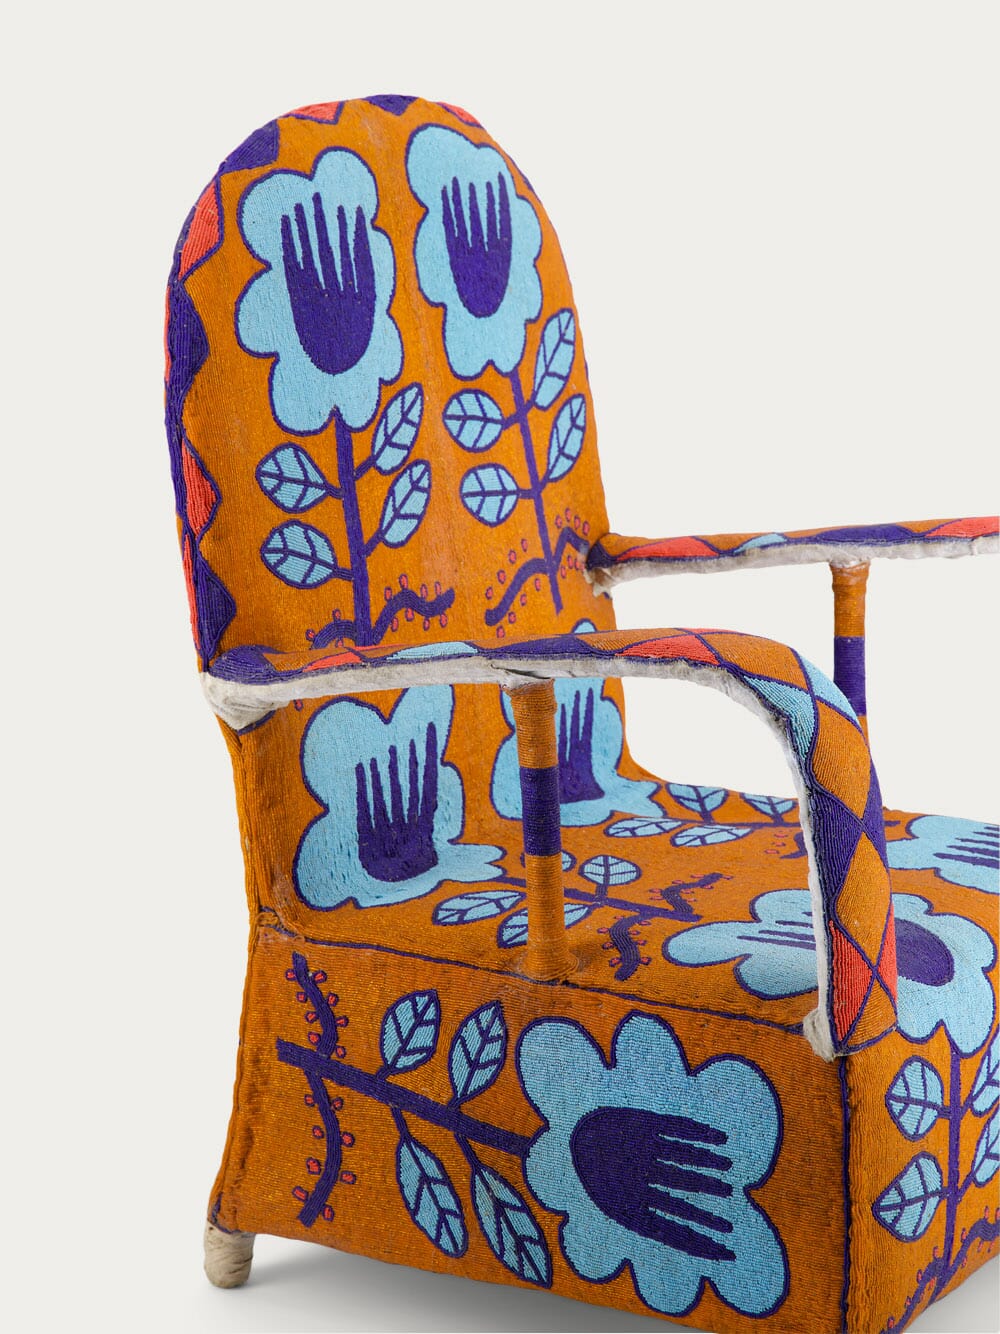 Fernando OteroRecycled Orange Beeds Armchair at Fashion Clinic